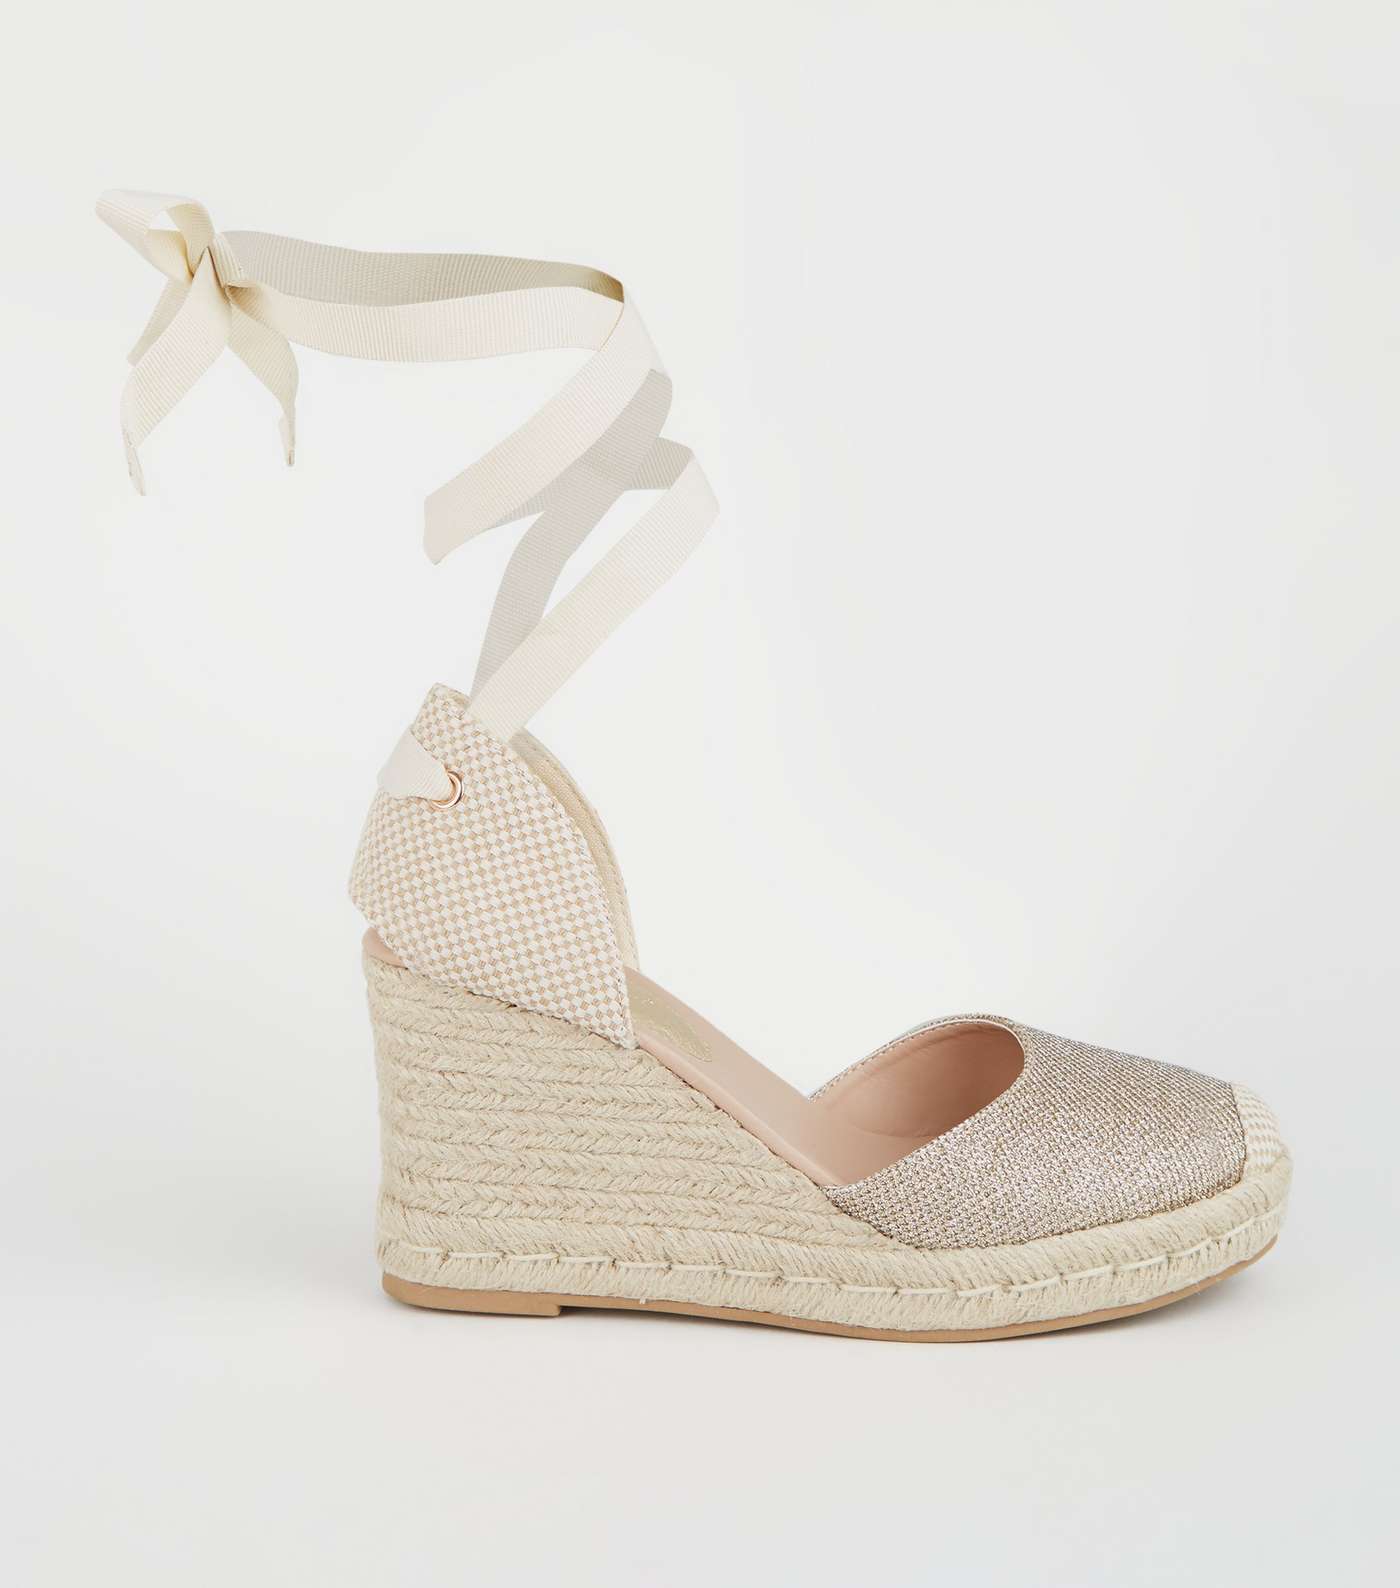 Gold Glitter Ankle Tie Espadrille Wedges